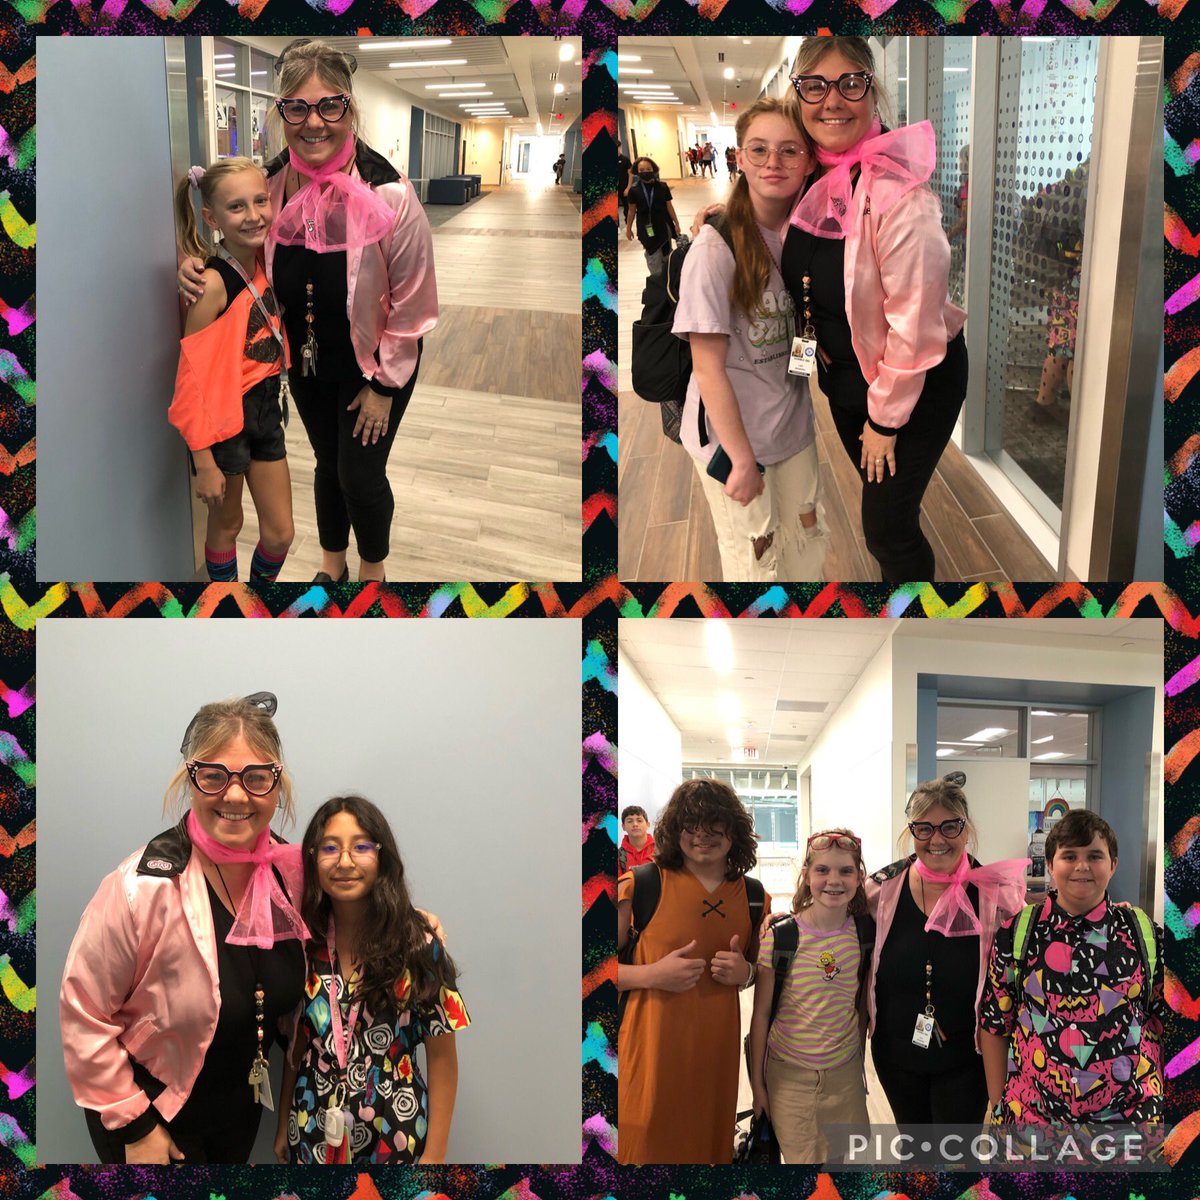 What do Barney Rubble, a Rugrat, a 90’s guy and girl, a hippie, Janet Jackson and a Pink Lady all have in common? We are 𝒹𝓇𝓊𝑔 𝒻𝓇𝑒𝑒 in our past, present, and future!🚫#KMSCougarPride🖤❤️🐾 #DecadesDay #RedRibbonWeek2023